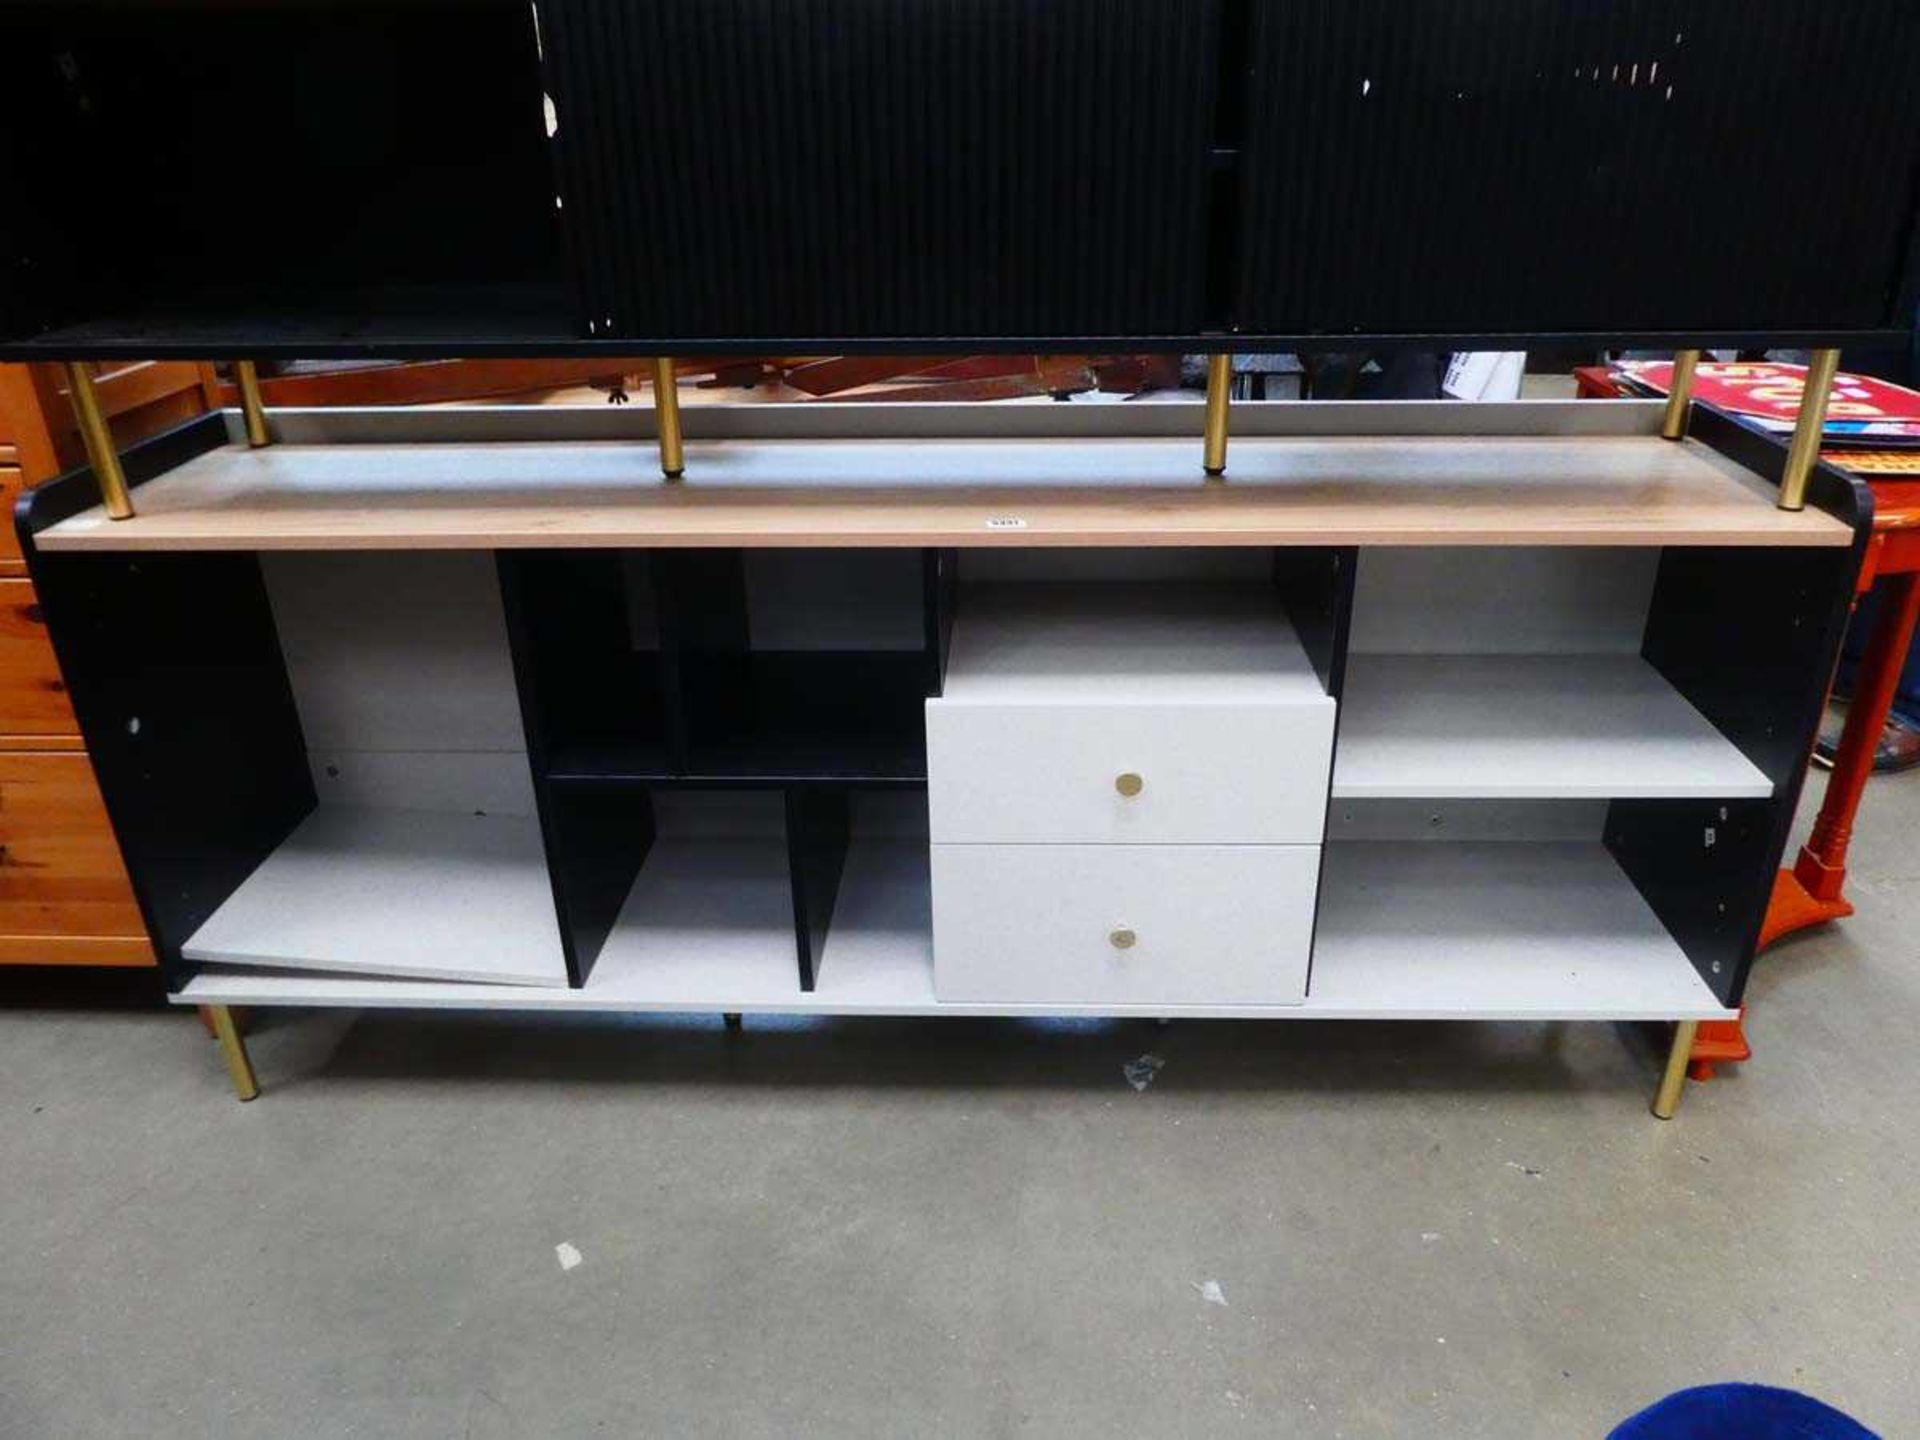 Sideboard with shelves and two central drawers